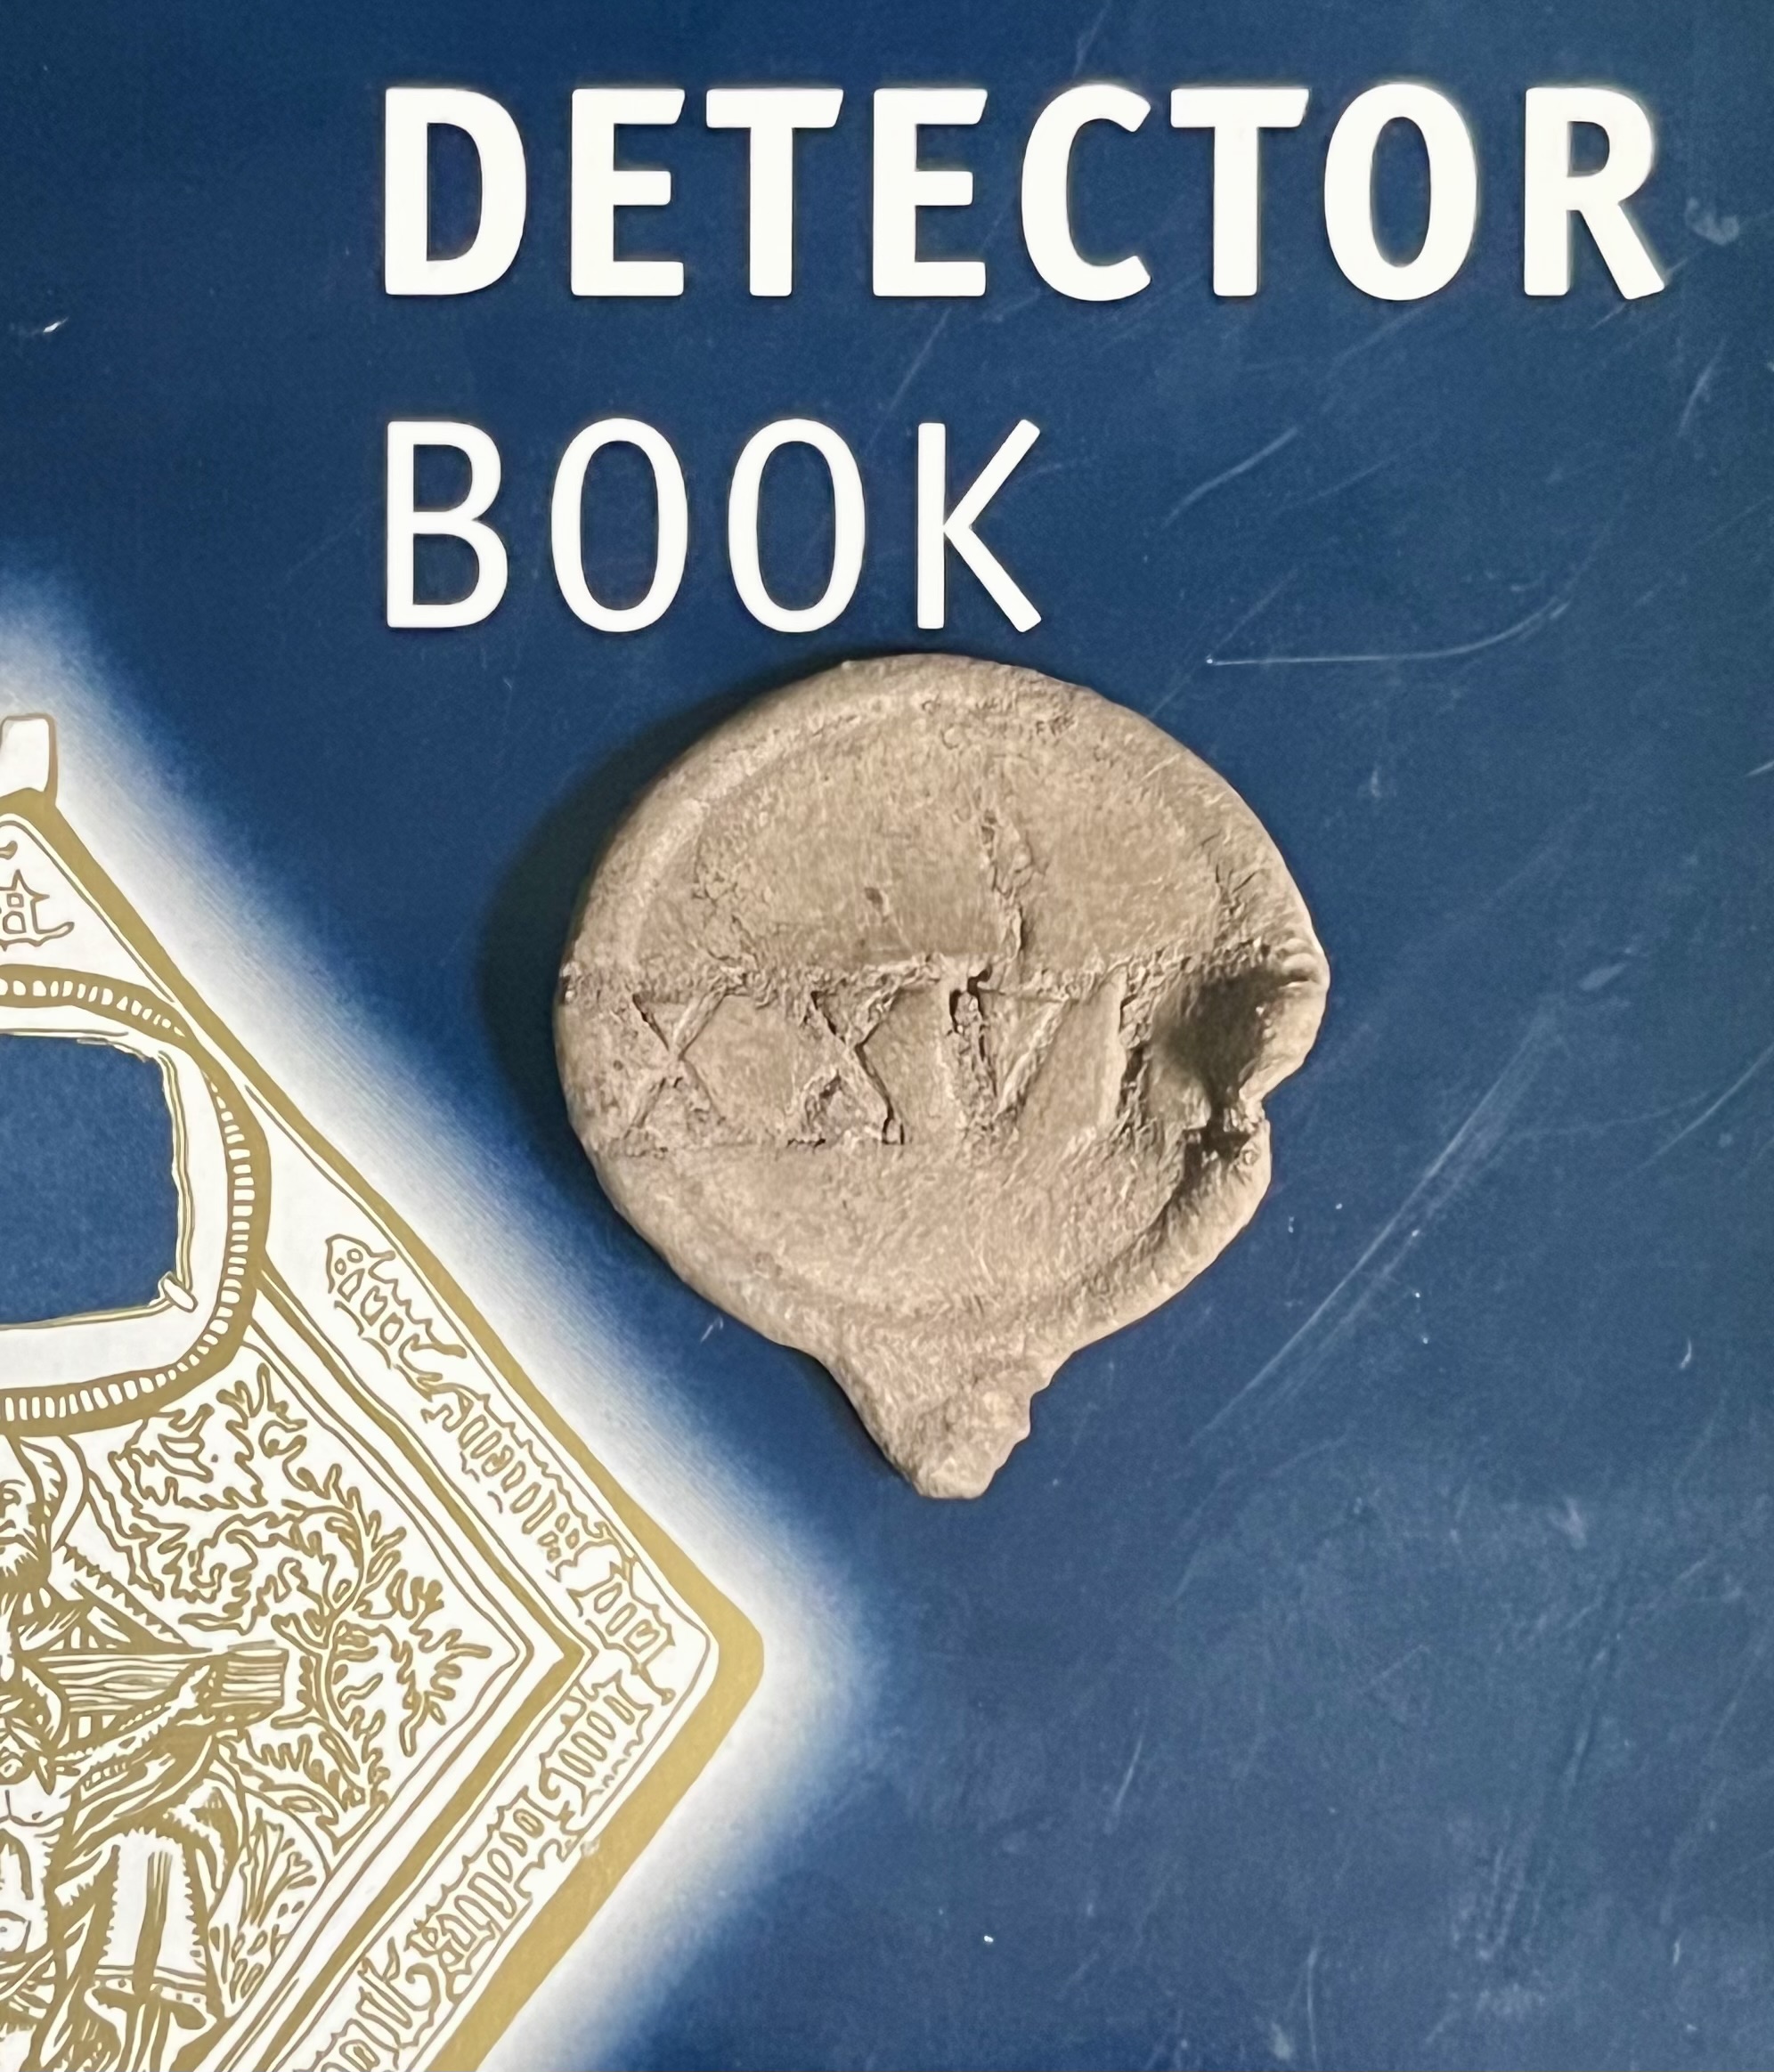 A Mysterious Lead Disc: A Metal Detectorist's Intriguing Find